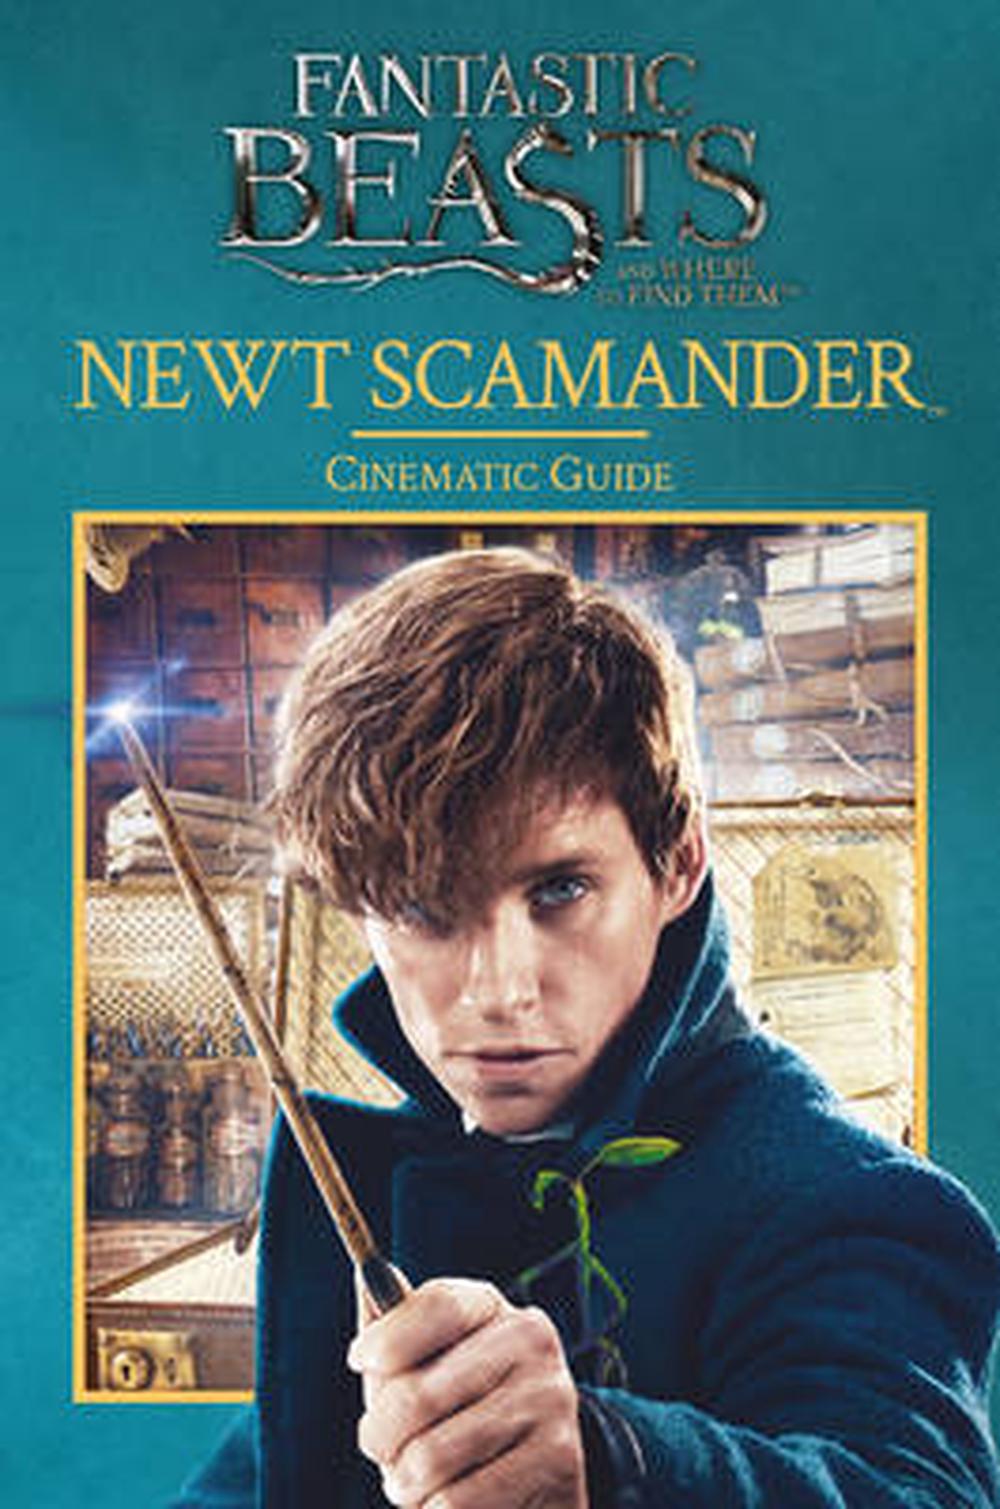 Fantastic Beasts and Where to Find Them: Newt Scamander: Cinematic Guide by Scho - Afbeelding 1 van 1